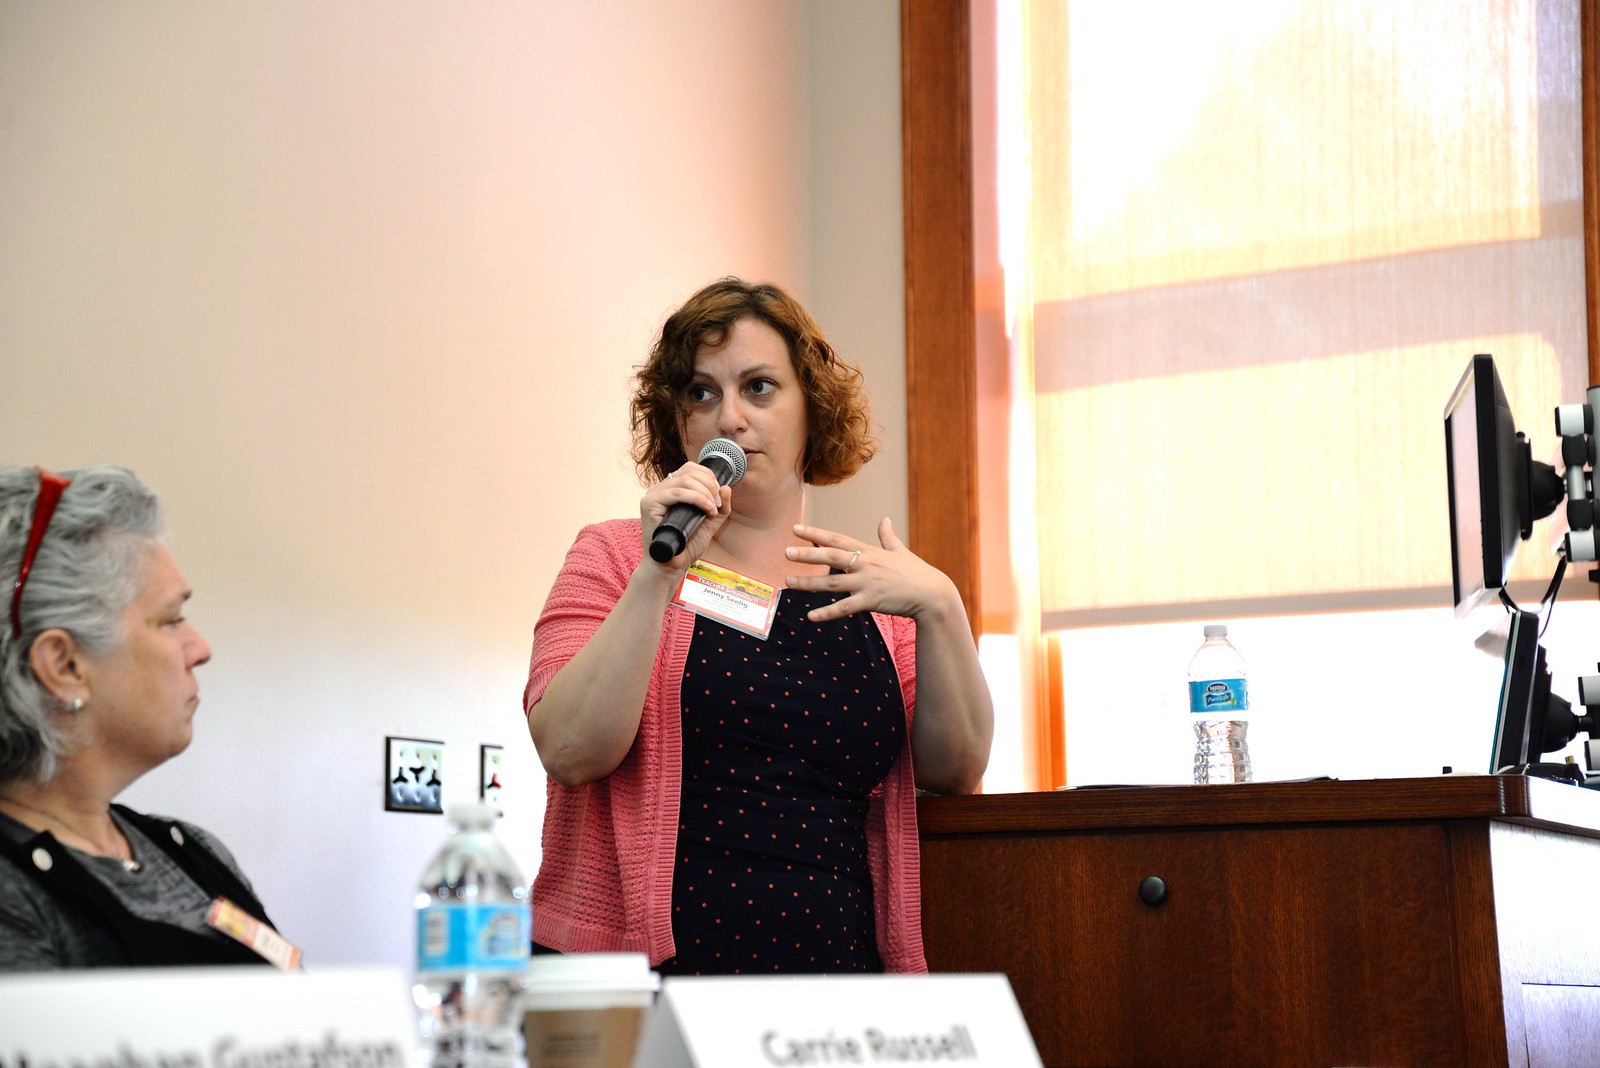 Doctoral student Jenny Seelig led the panel discussion